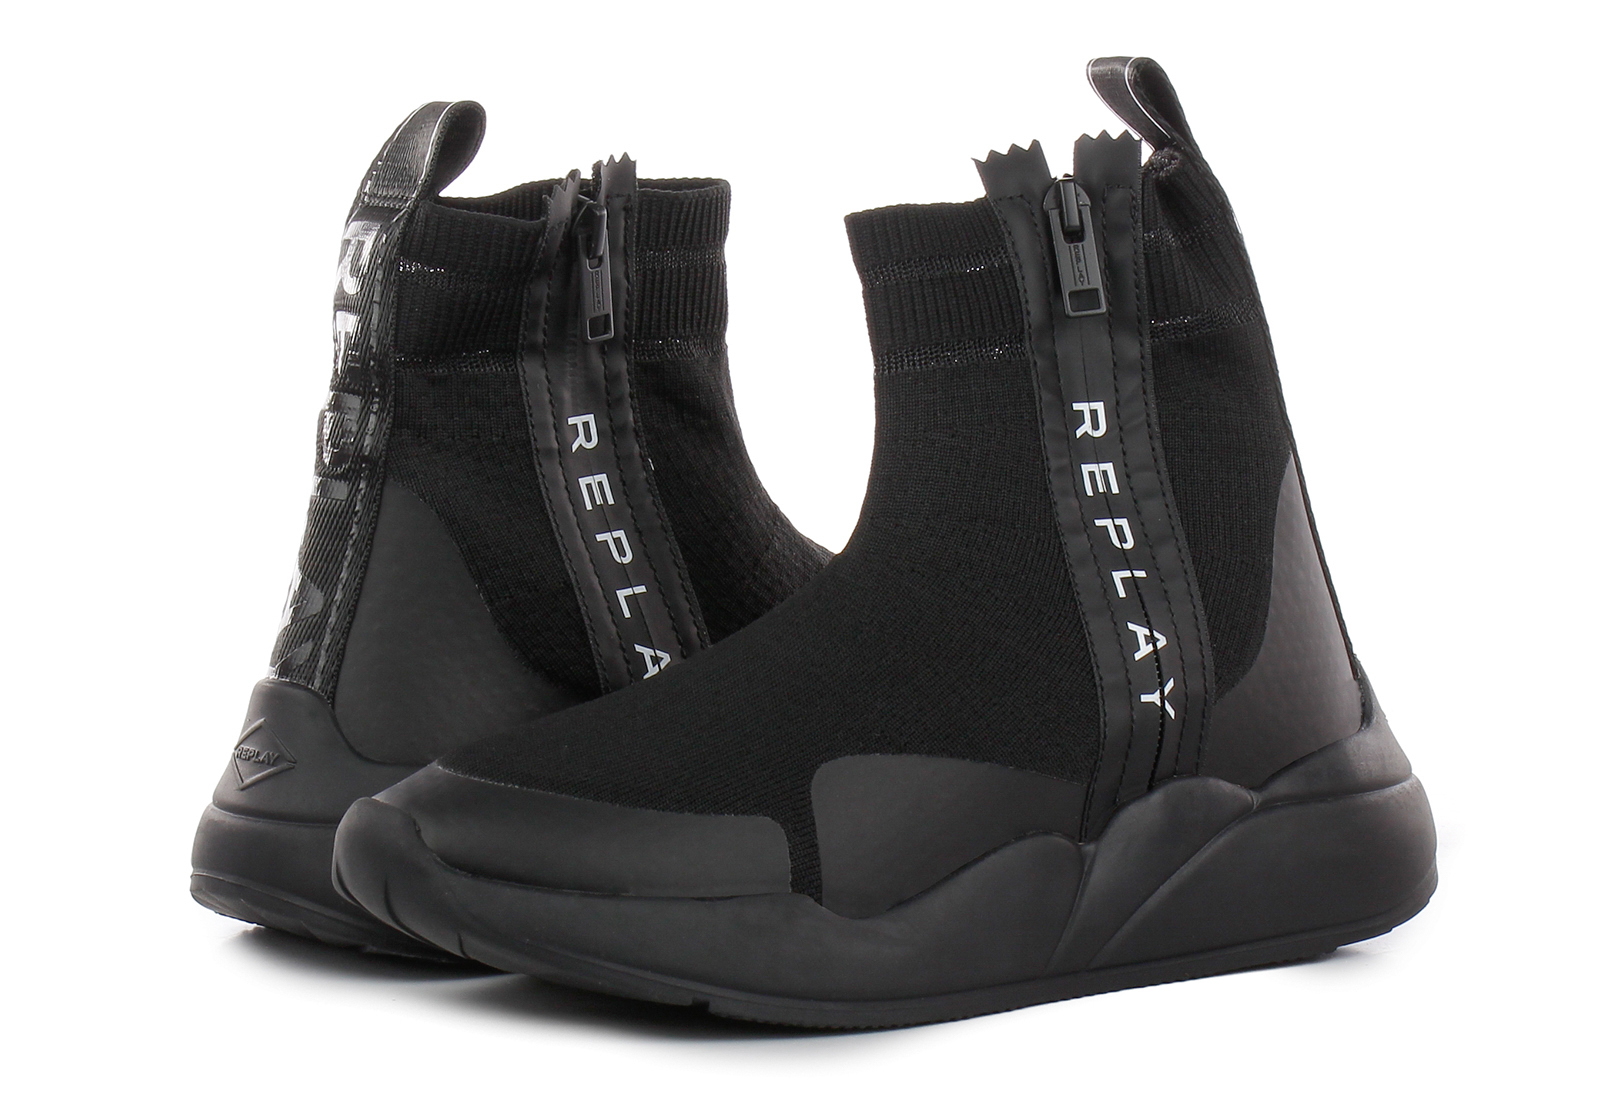 Replay High shoes - Hera Zeta - RS5B0006T-003 - Online shop for sneakers,  shoes and boots